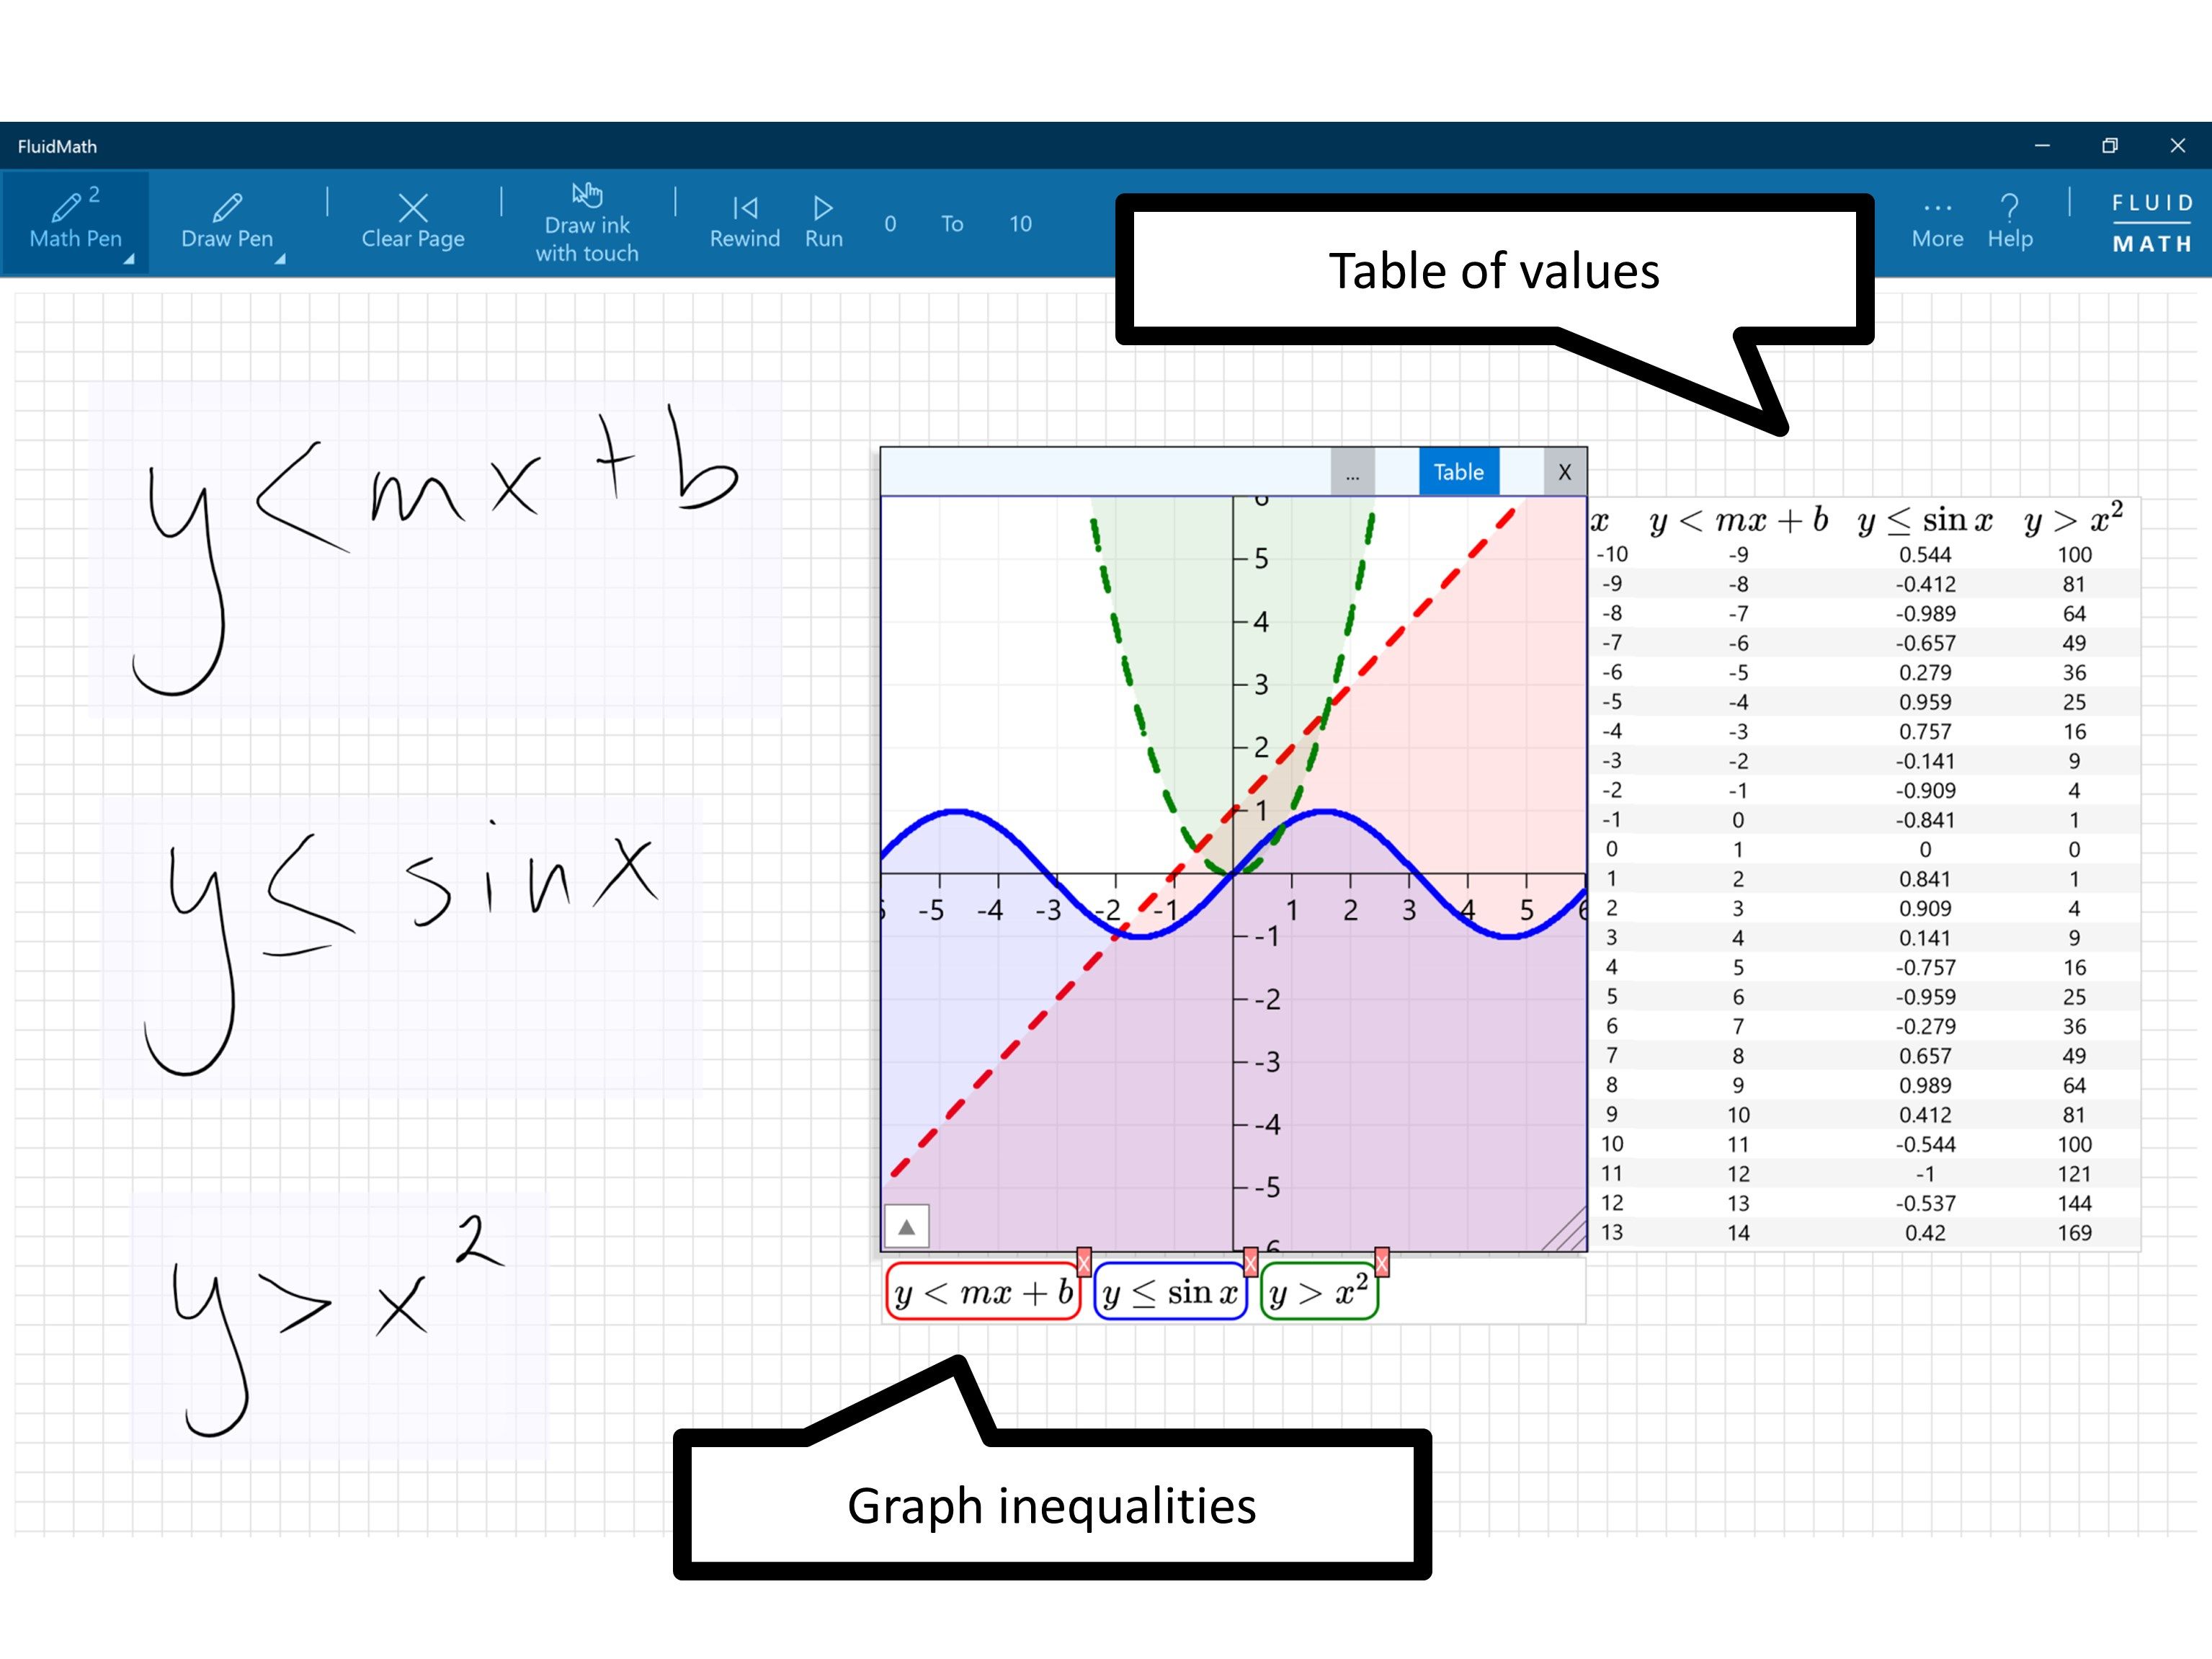 Graphing inequalities and table of values